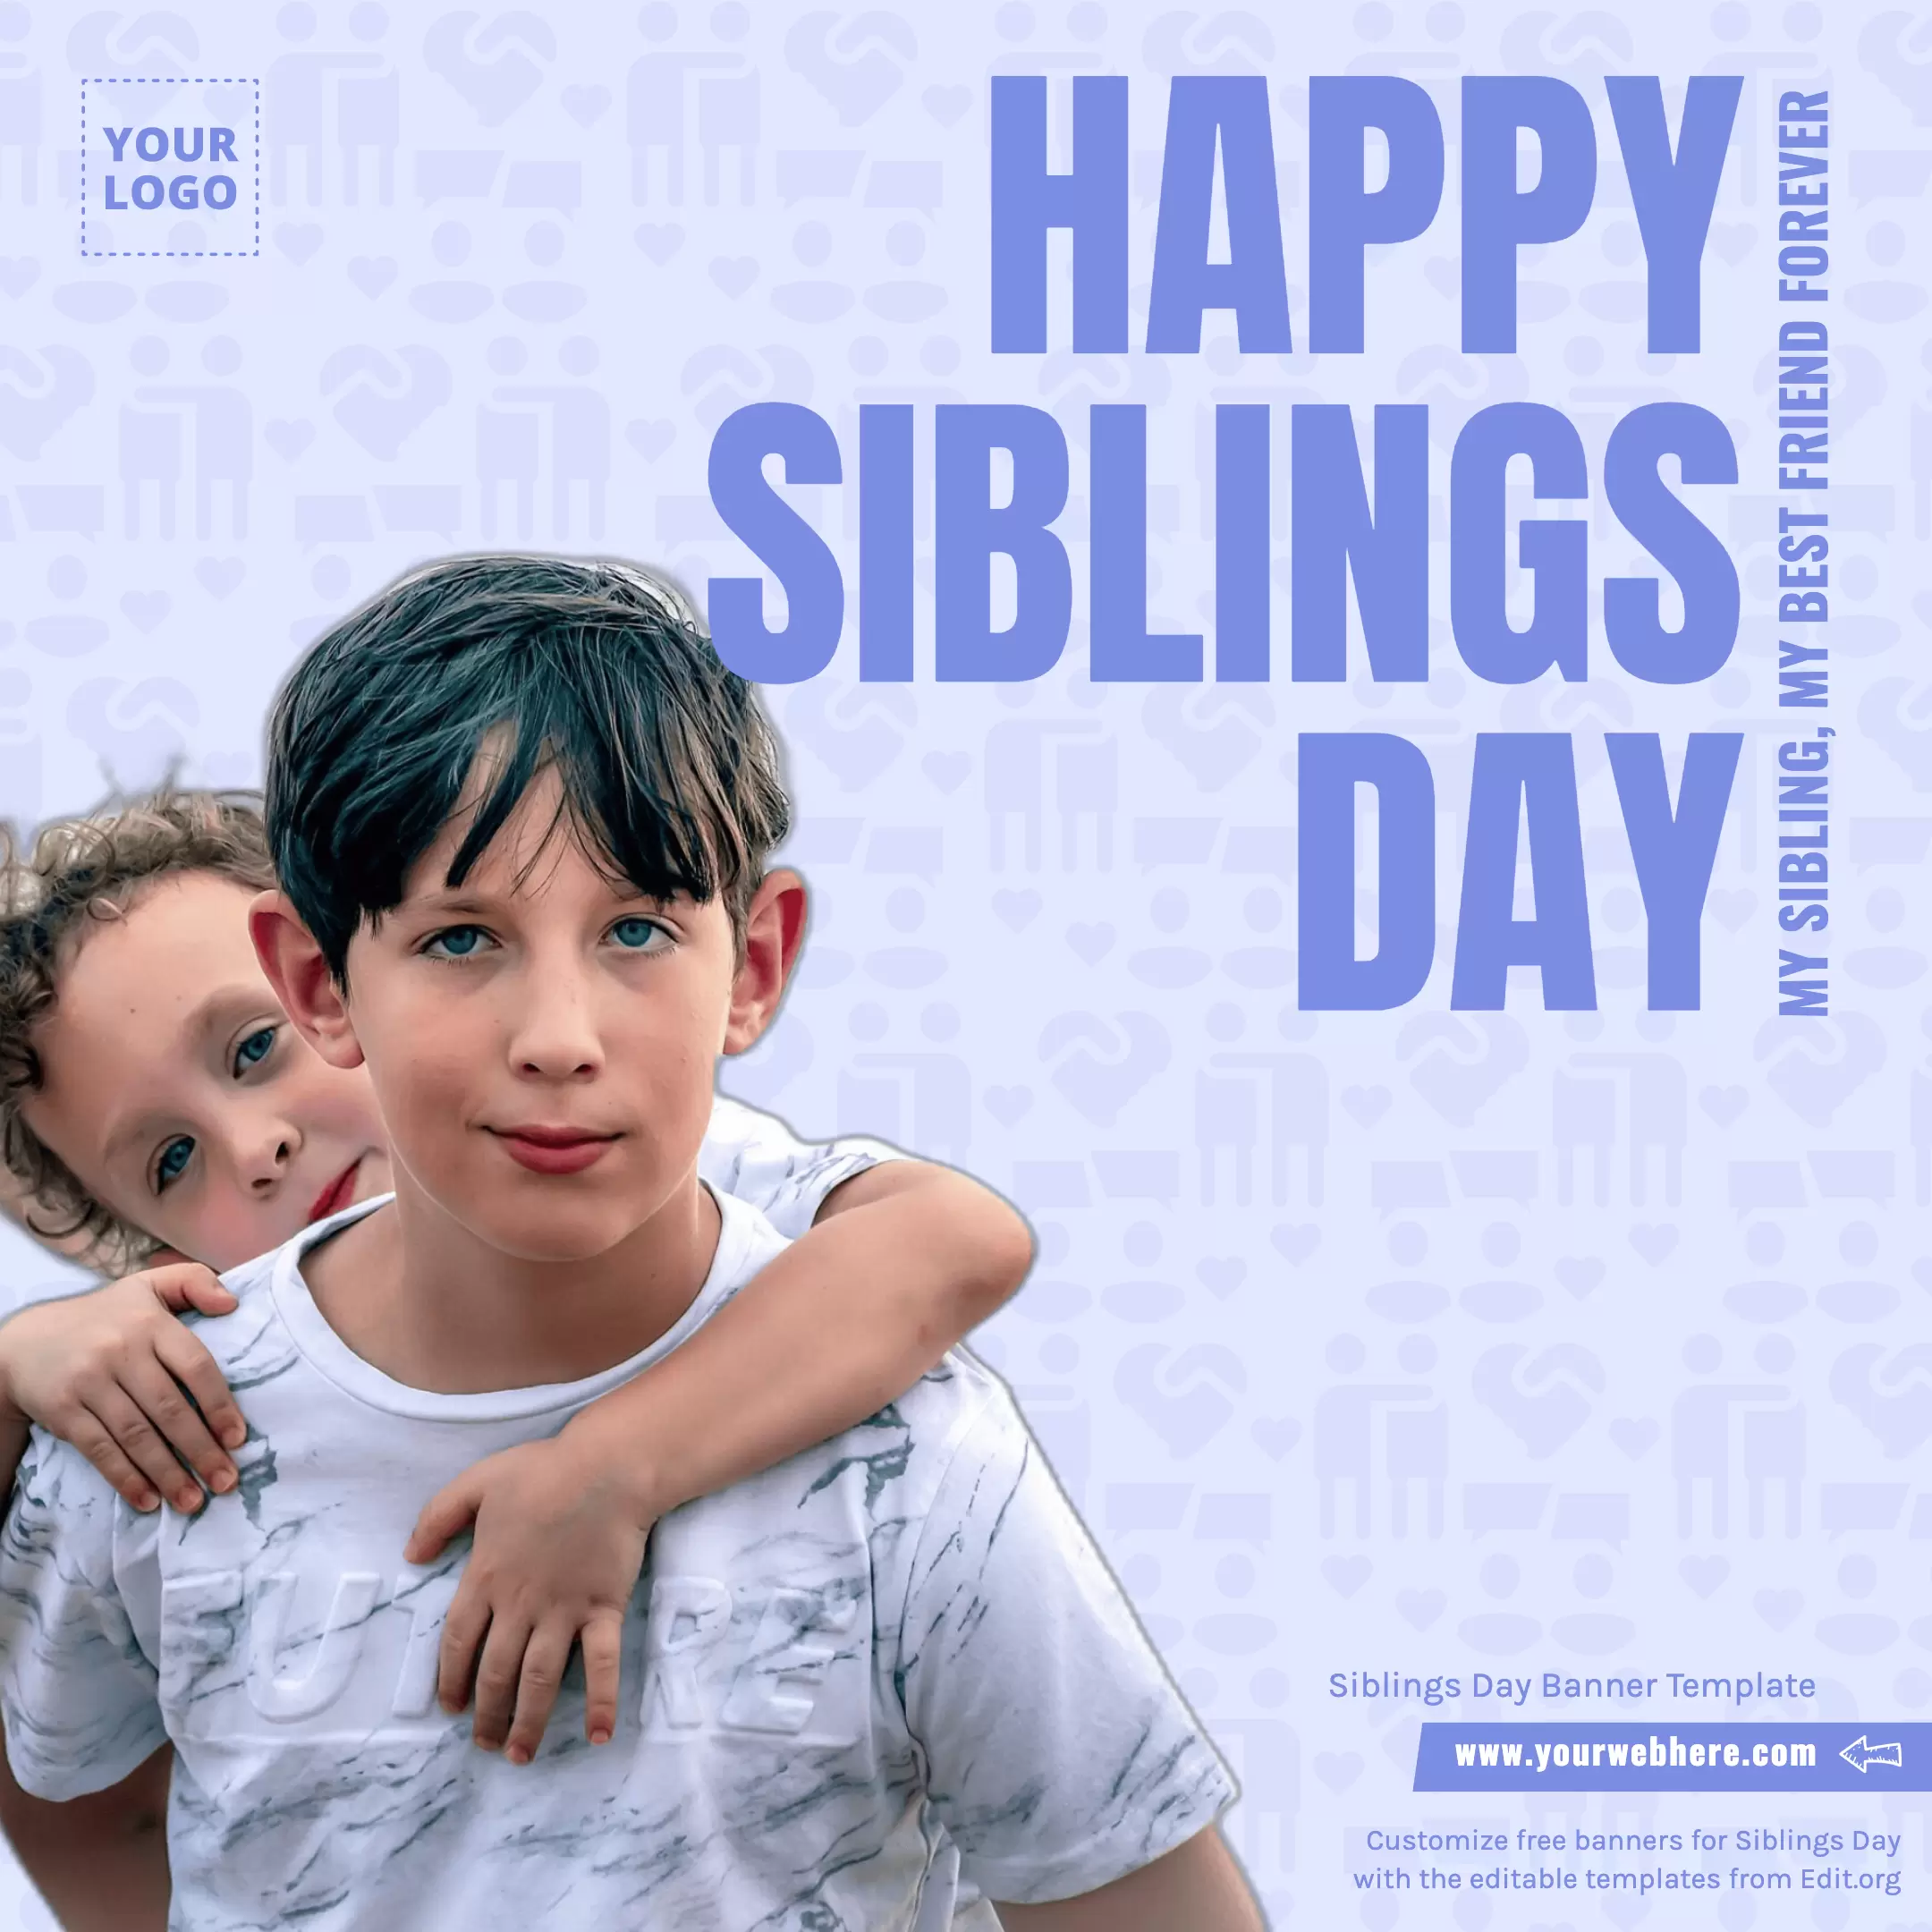 Happy National Brothers and Sisters Day banner template